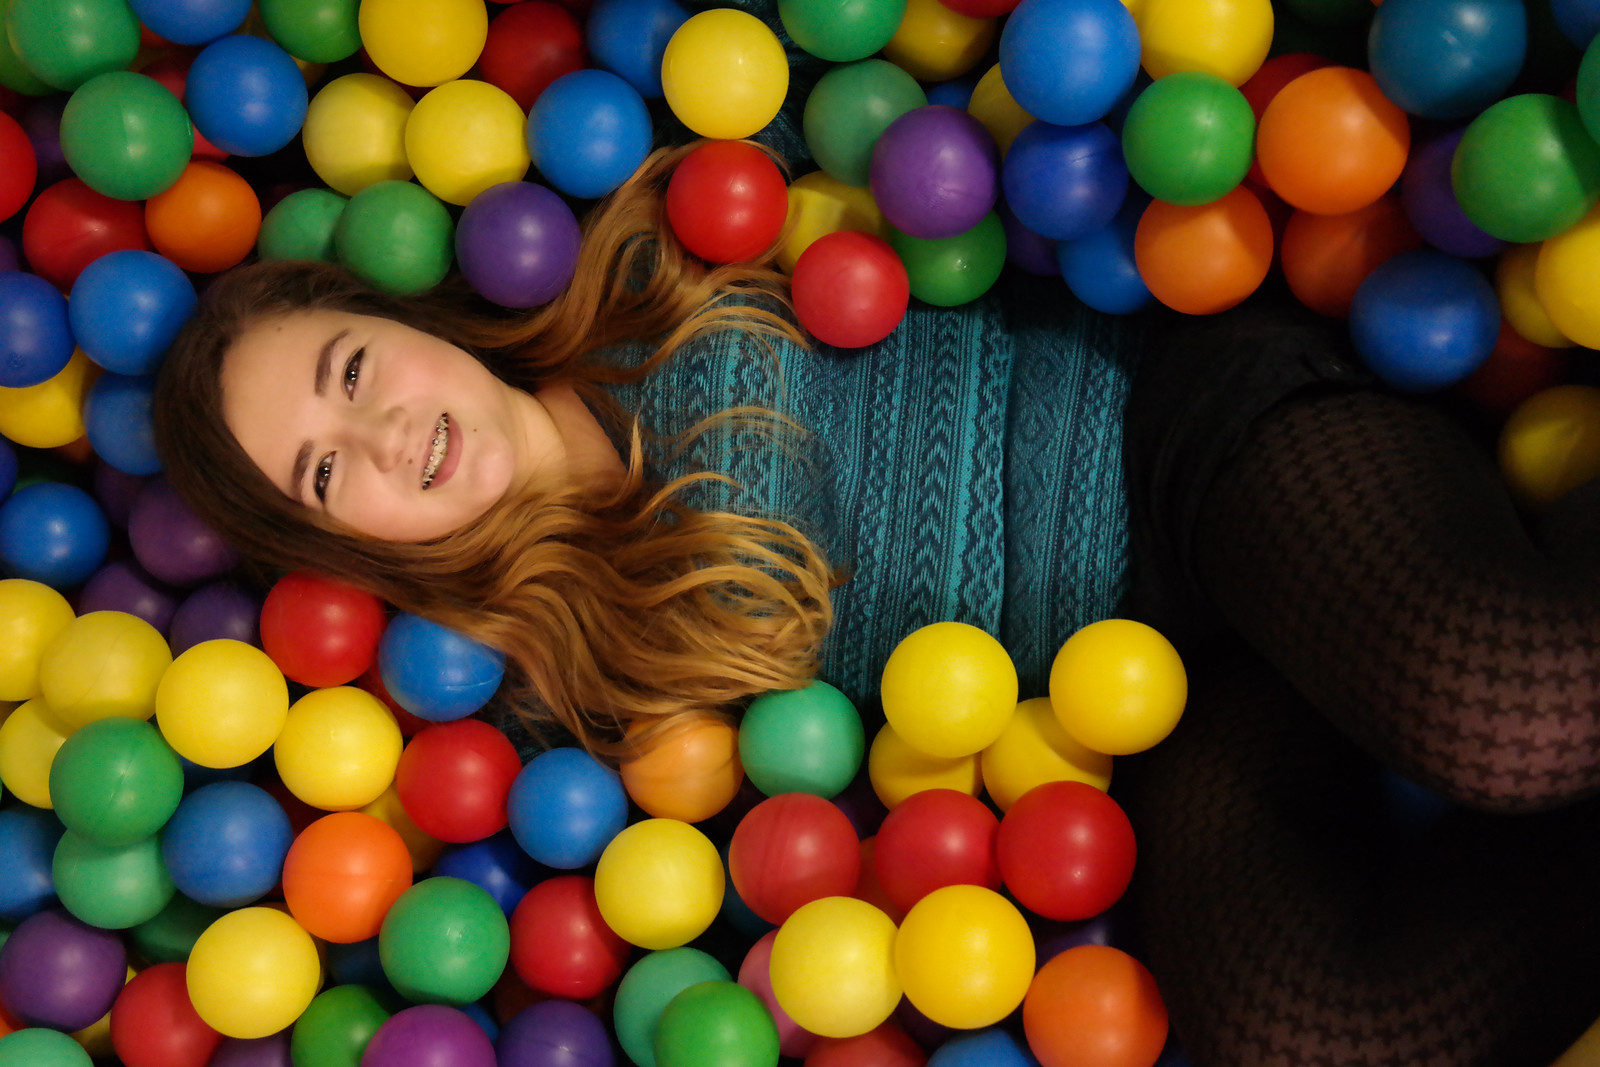 Emily in the Ball Pit